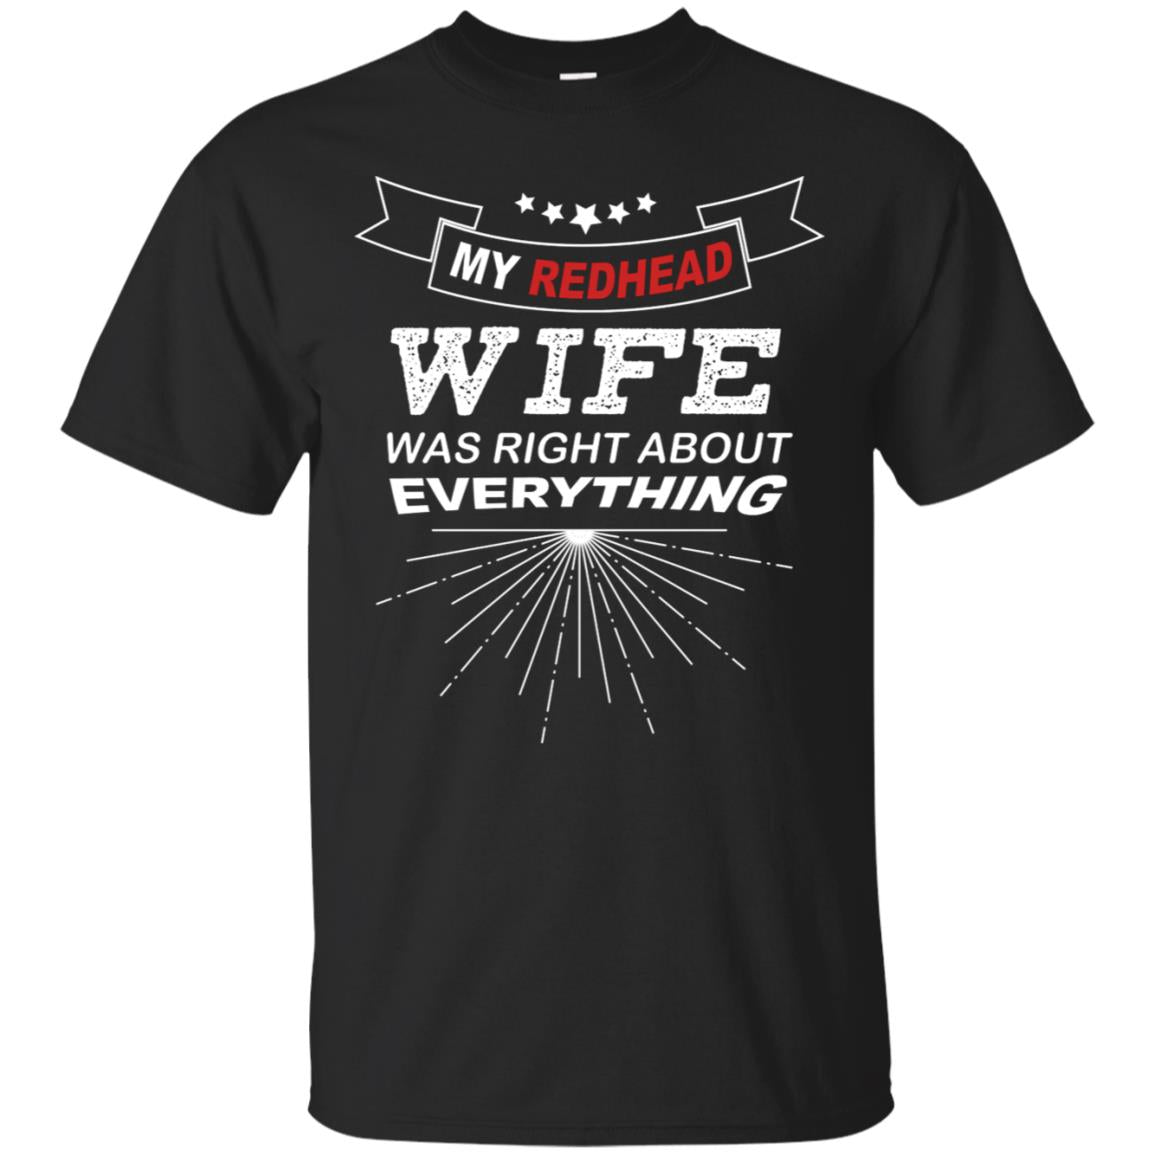 My Redhead Wife Was Right About Everything Shirt For HusbandG200 Gildan Ultra Cotton T-Shirt